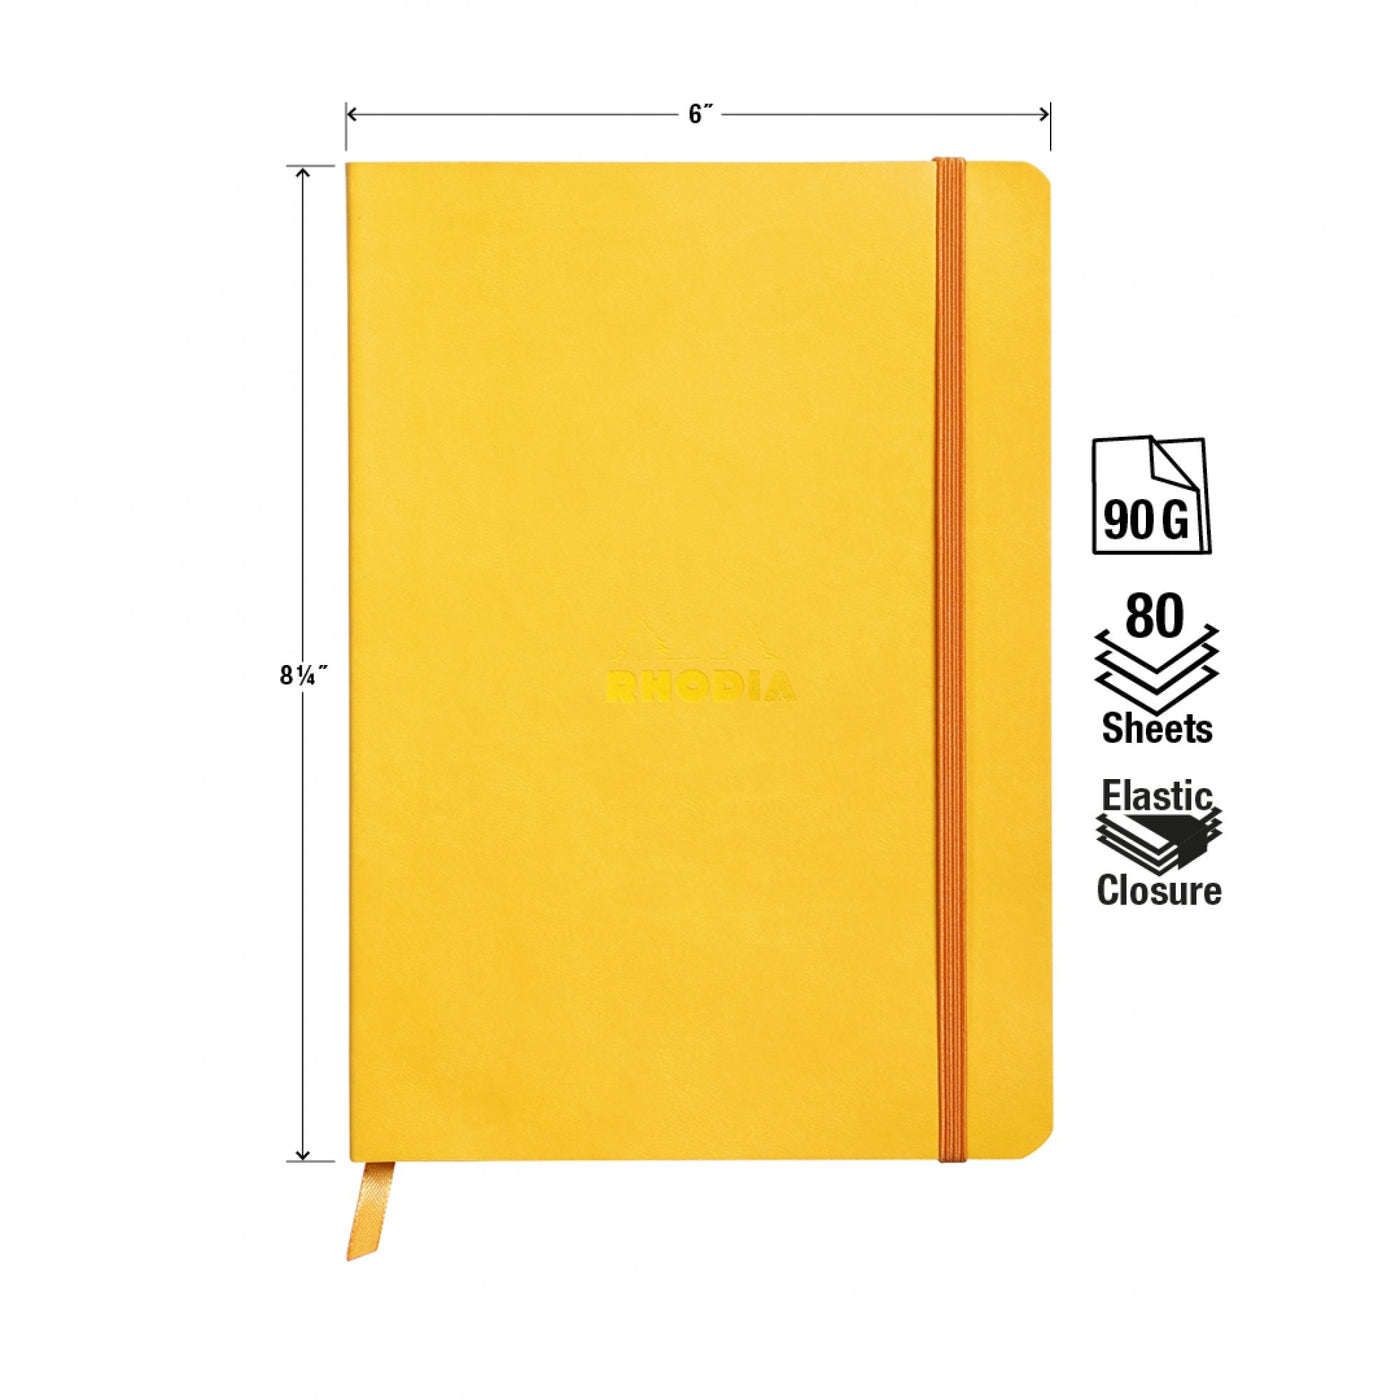 Rhodia Rhodiarama Soft Cover A5 Yellow Dotted Notebook Measurements